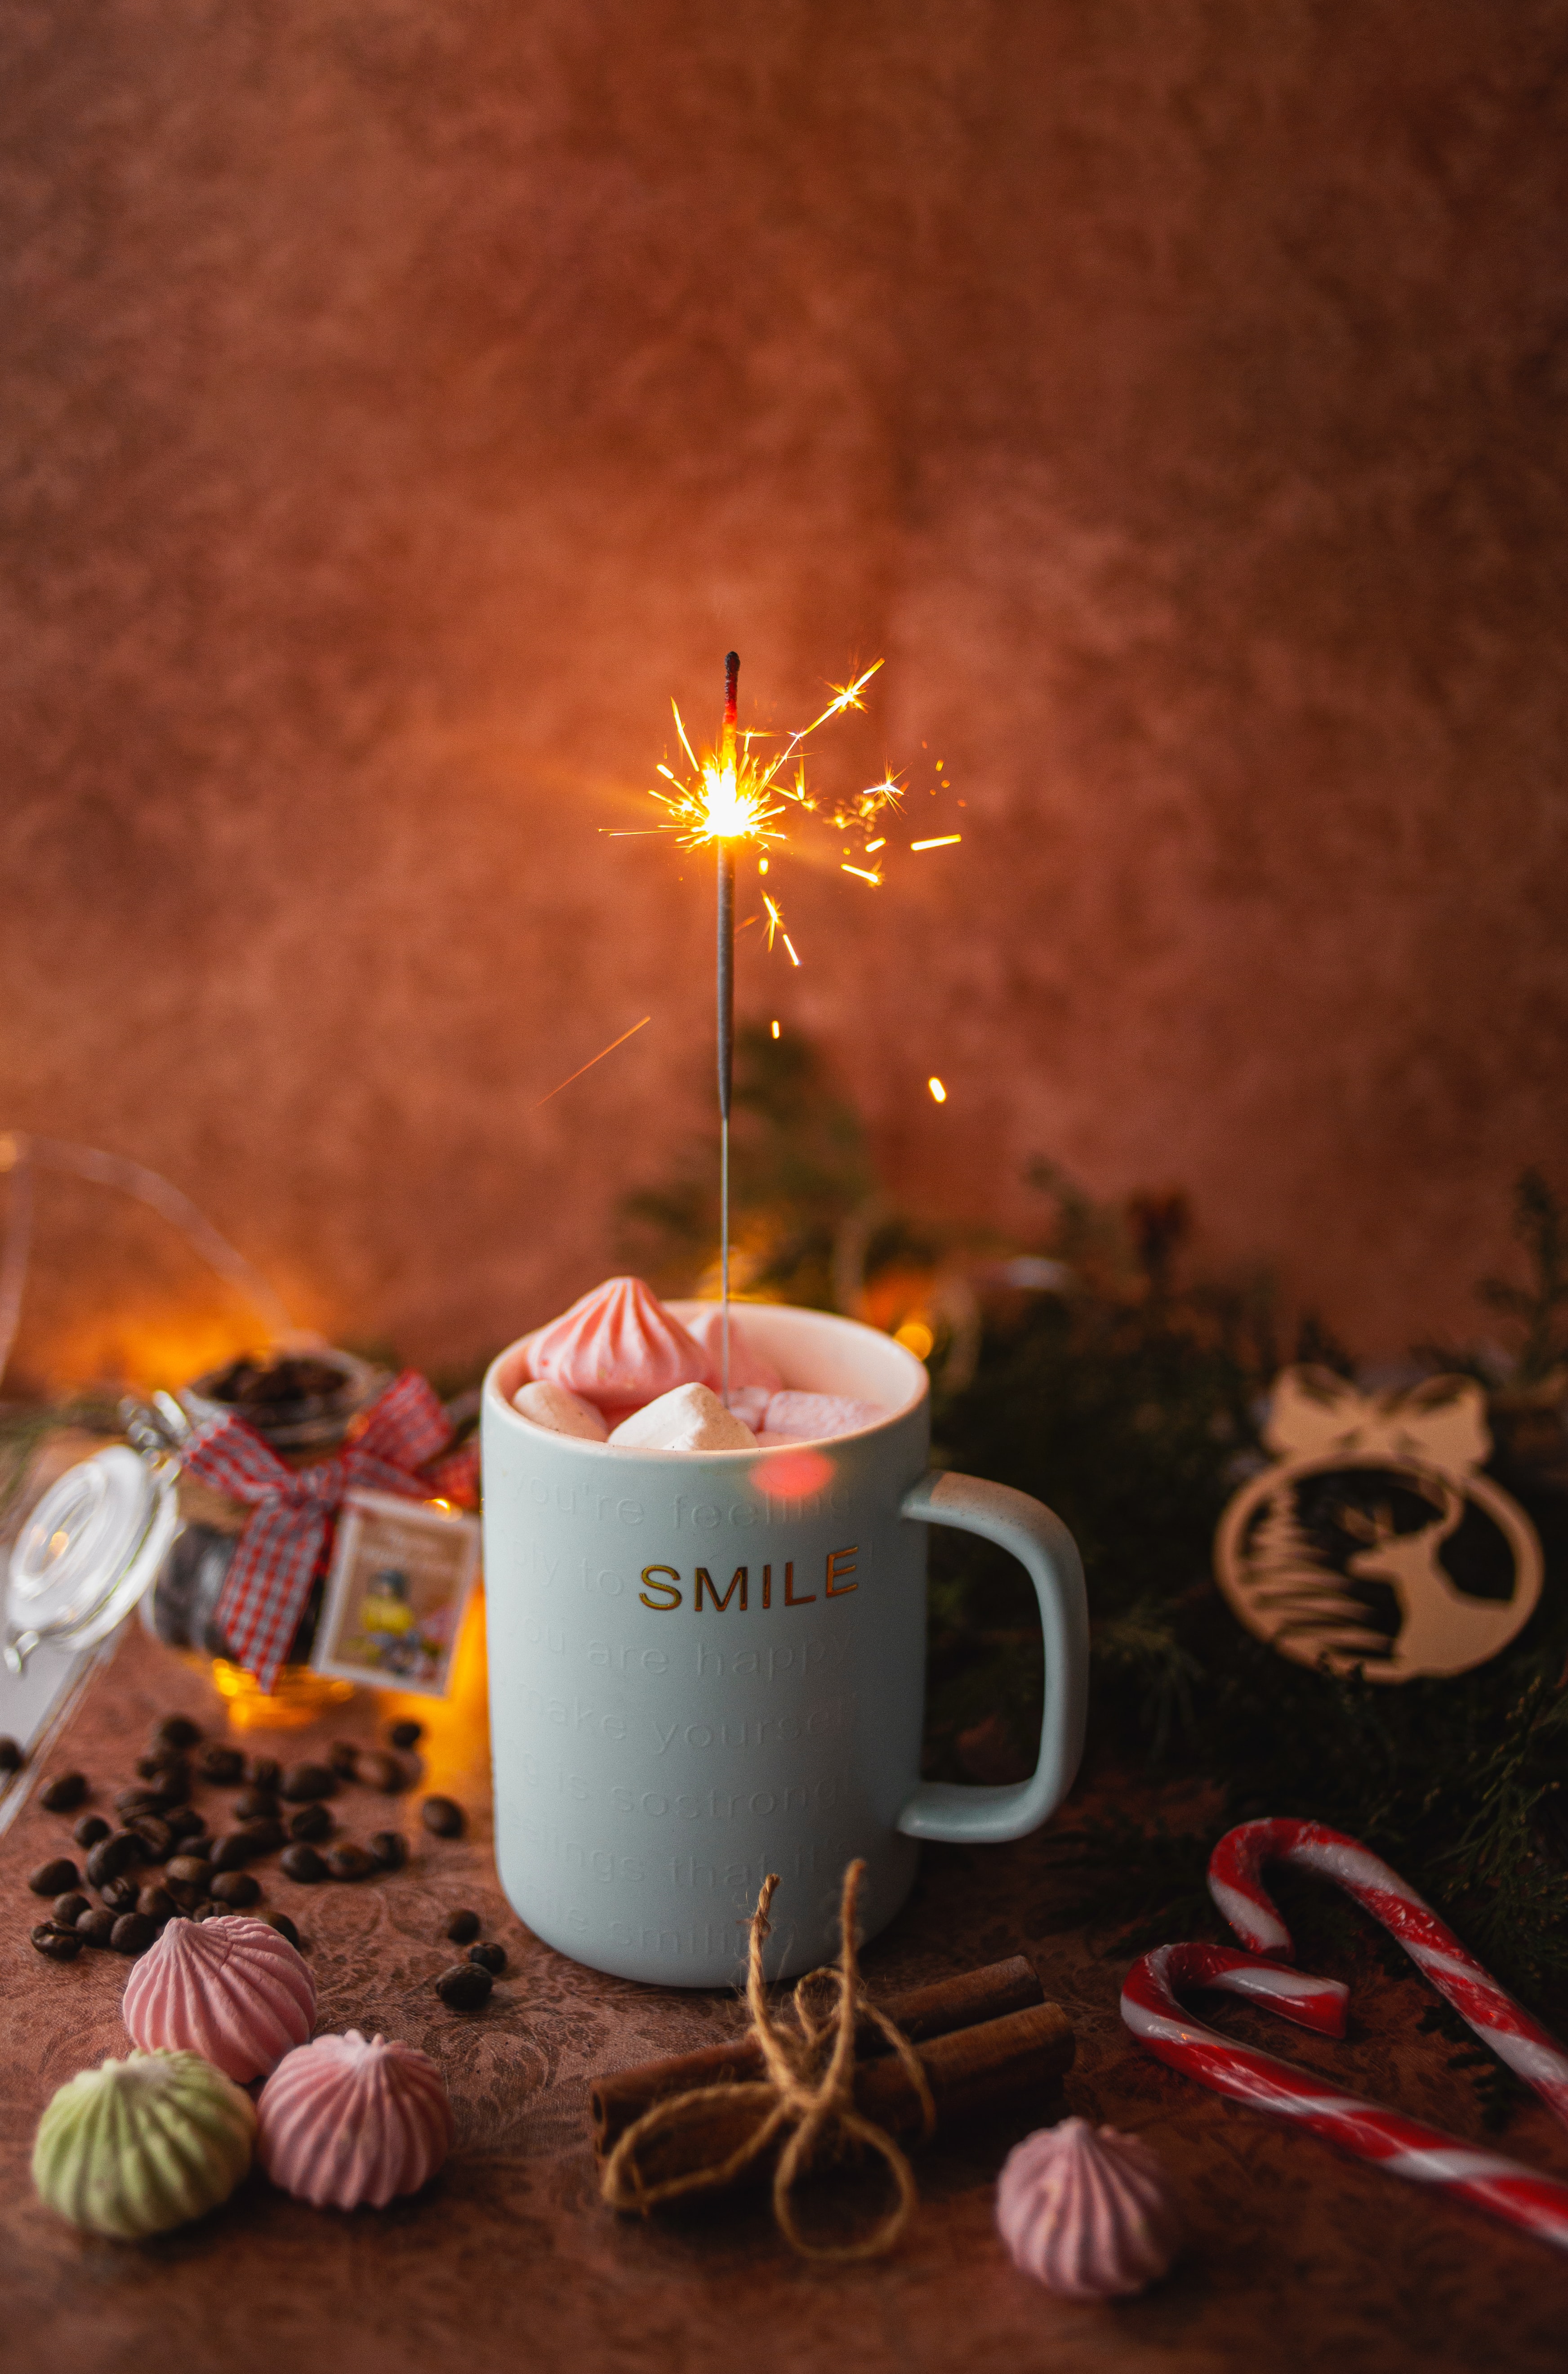 miscellanea, mug, holiday, sparks, cup, miscellaneous, marshmallow, bengal lights, sparklers, zephyr iphone wallpaper